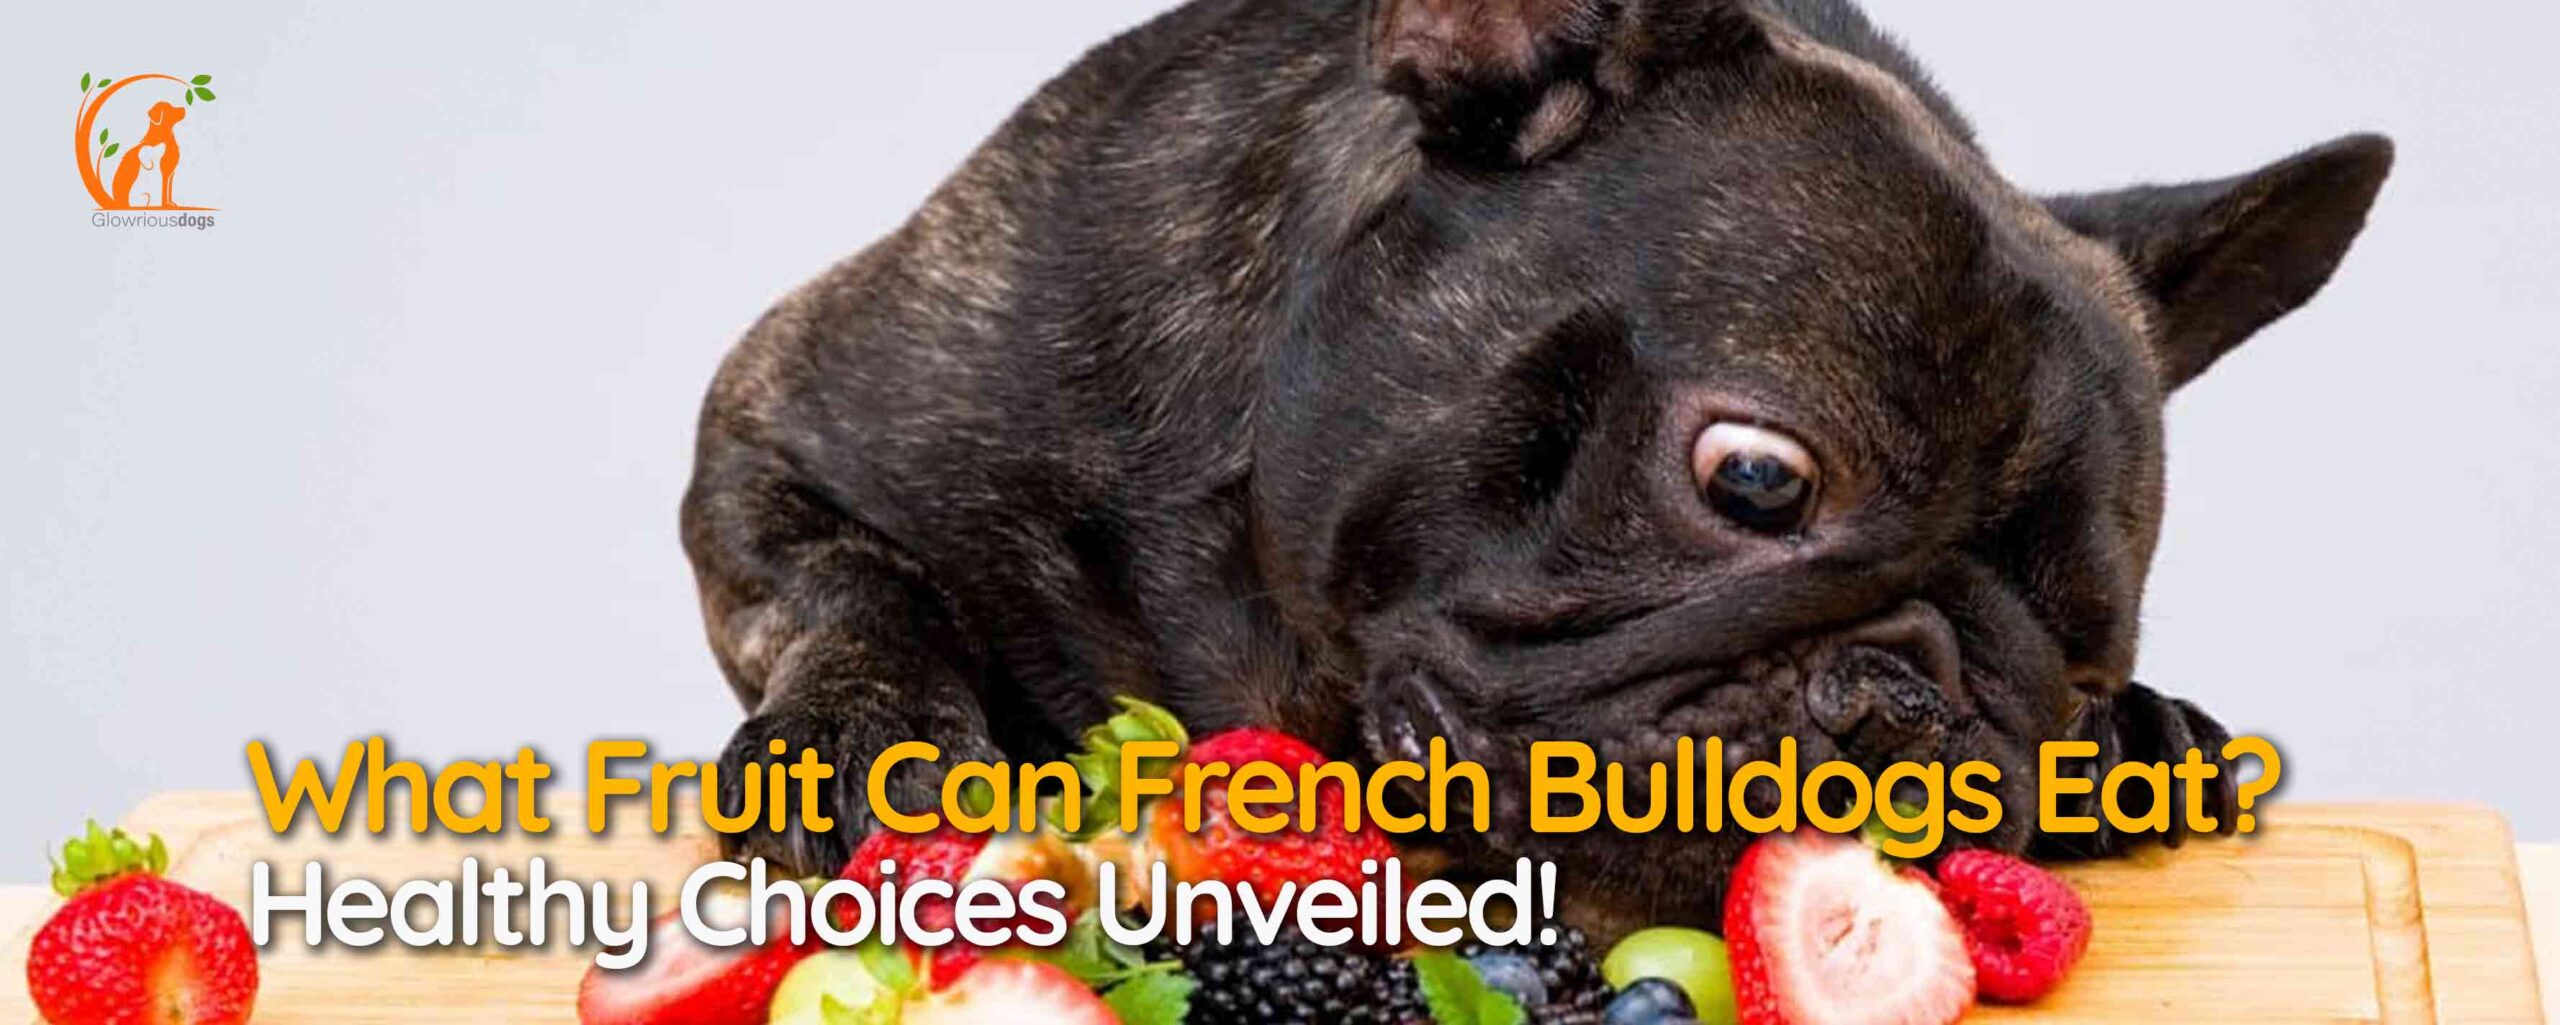 What Fruit Can French Bulldogs Eat? Healthy Choices Unveiled!